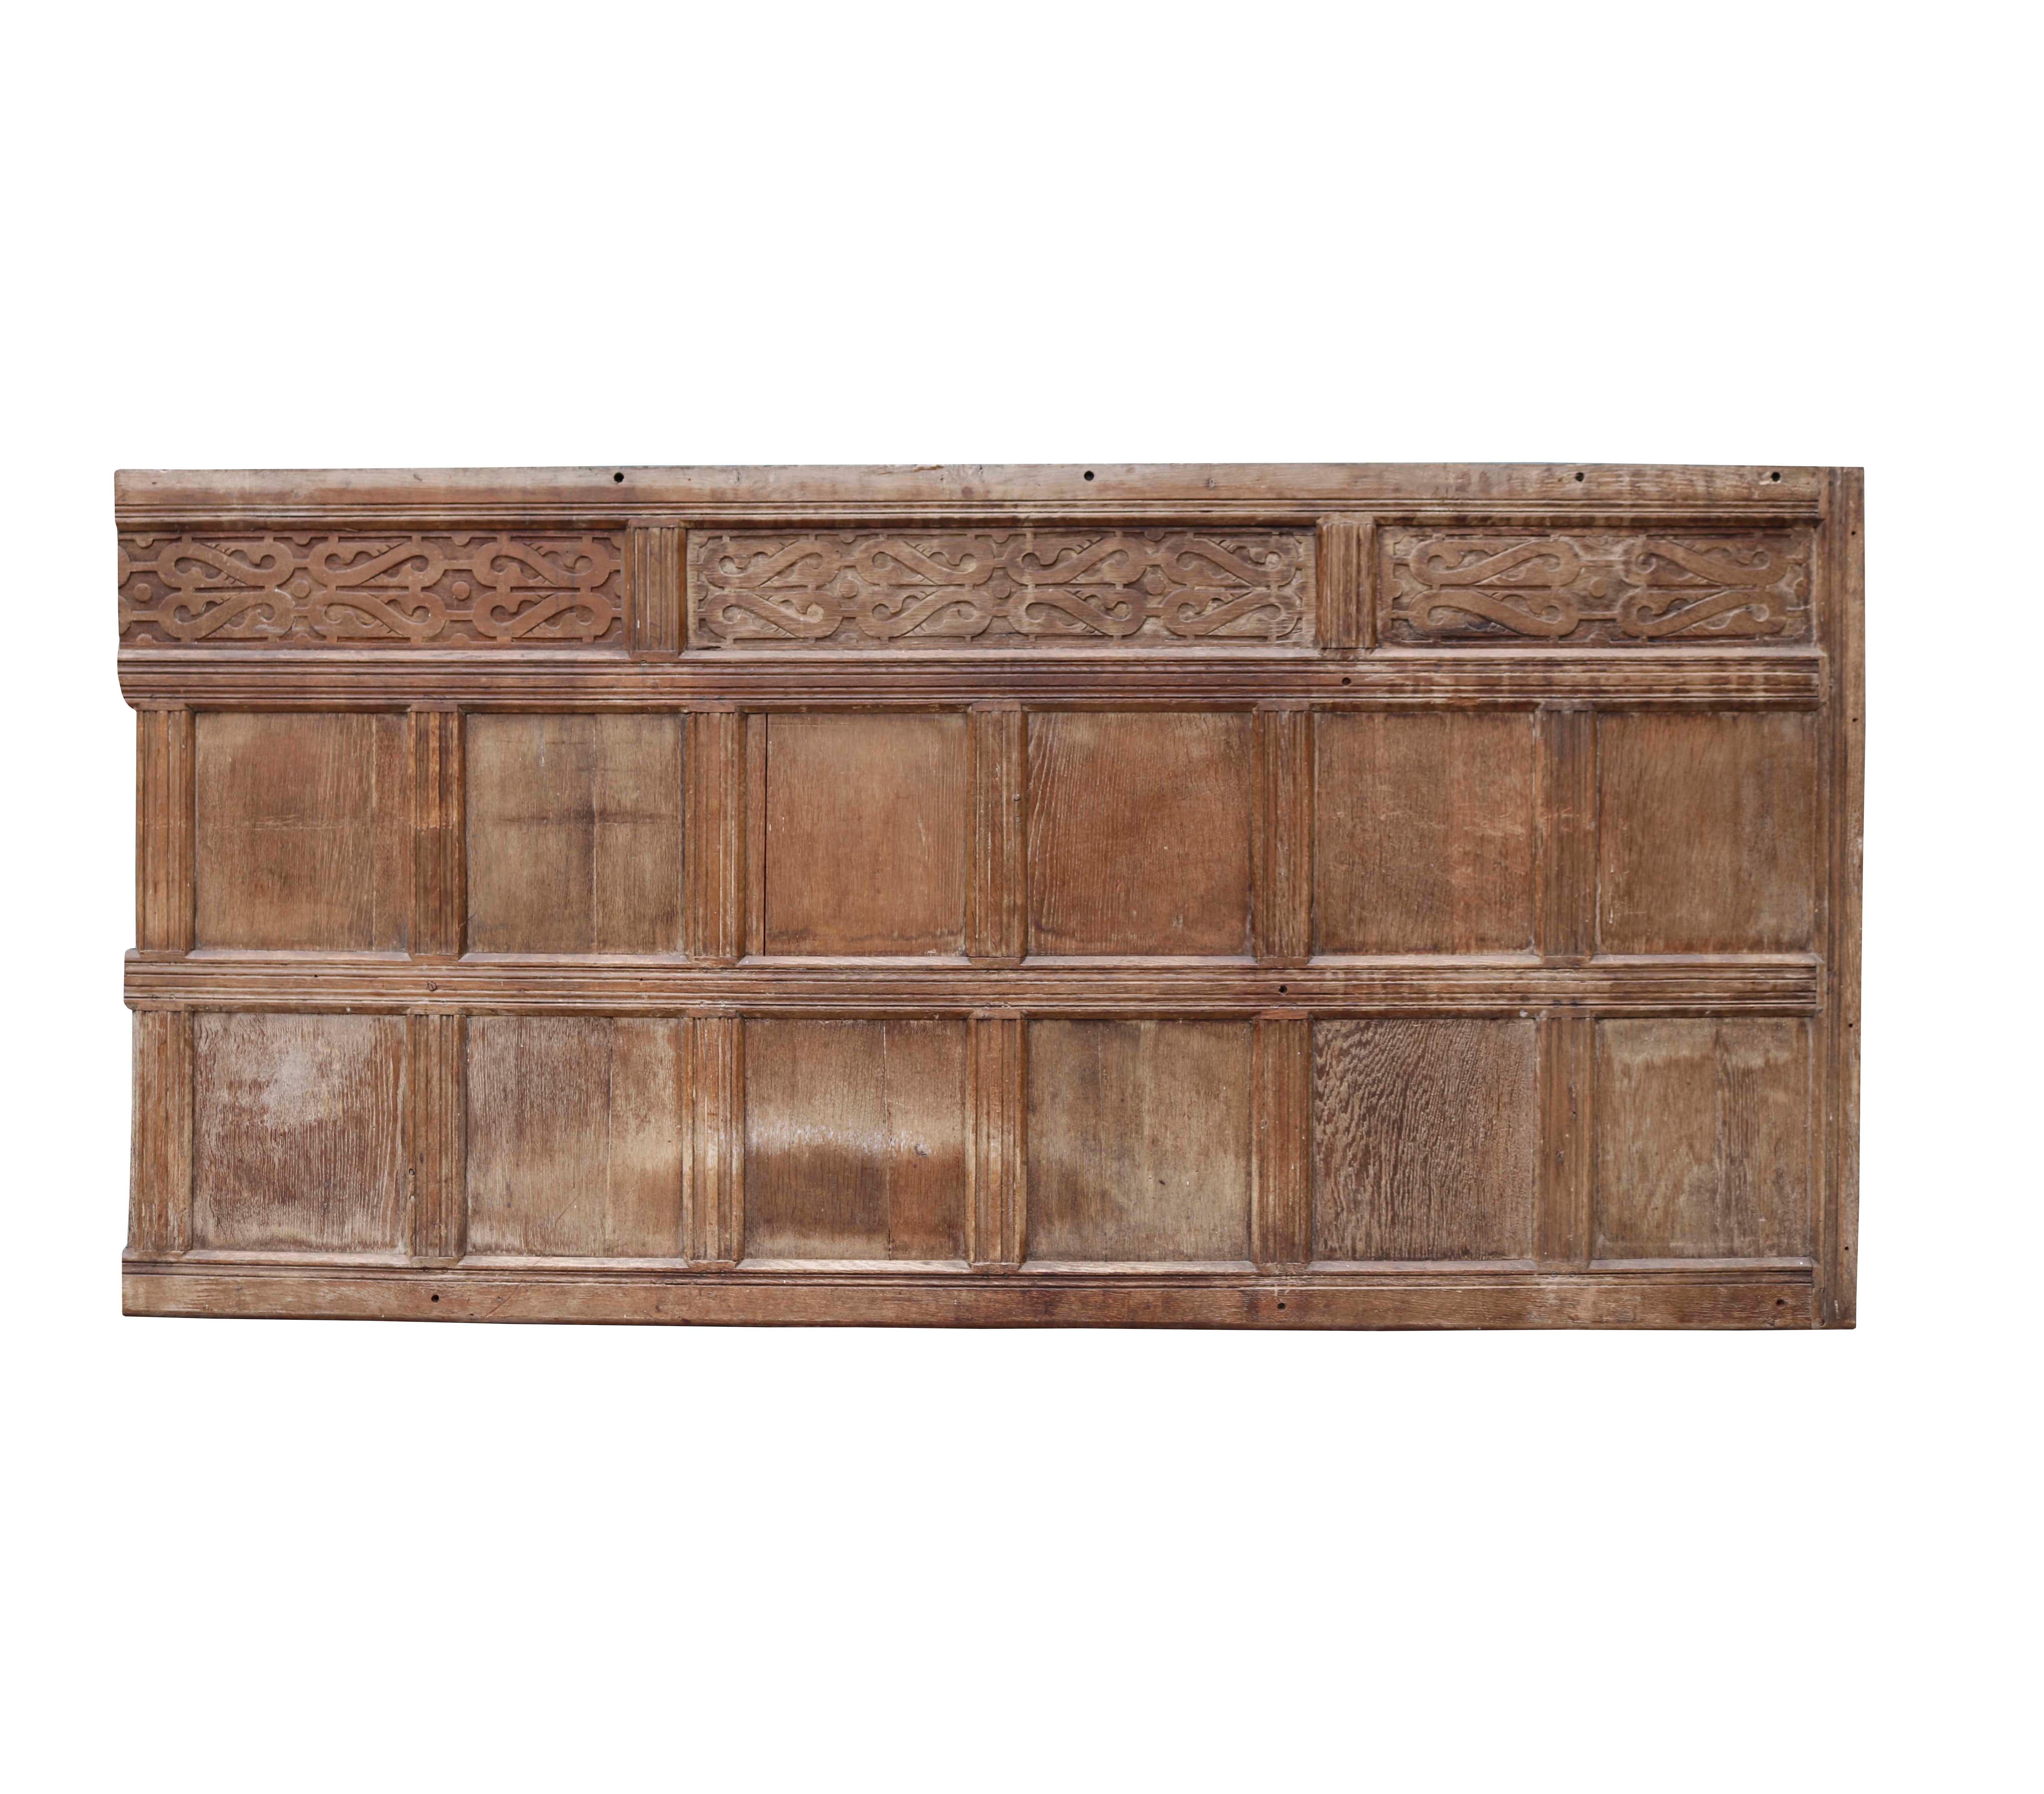 Reclaimed 17th century English oak wall panelling 20.8m (68 ft) A very rare batch of late 17th century dado height wall panelling. Good structural condition. There are a few cut outs for sockets and there have been adaptations and alterations in the